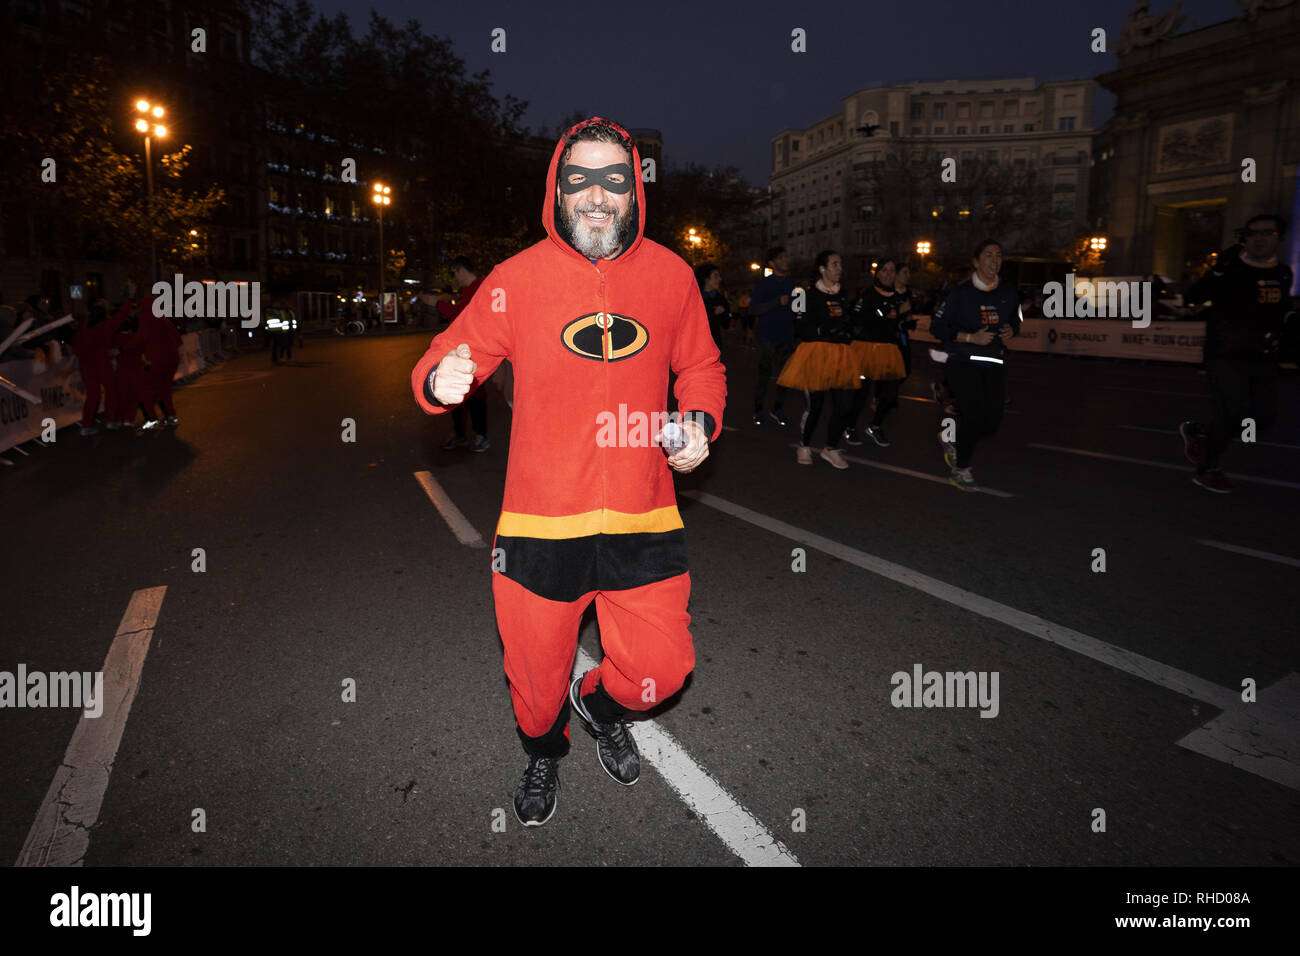 The san silvestre vallecana race in madrid hi-res stock photography and  images - Alamy